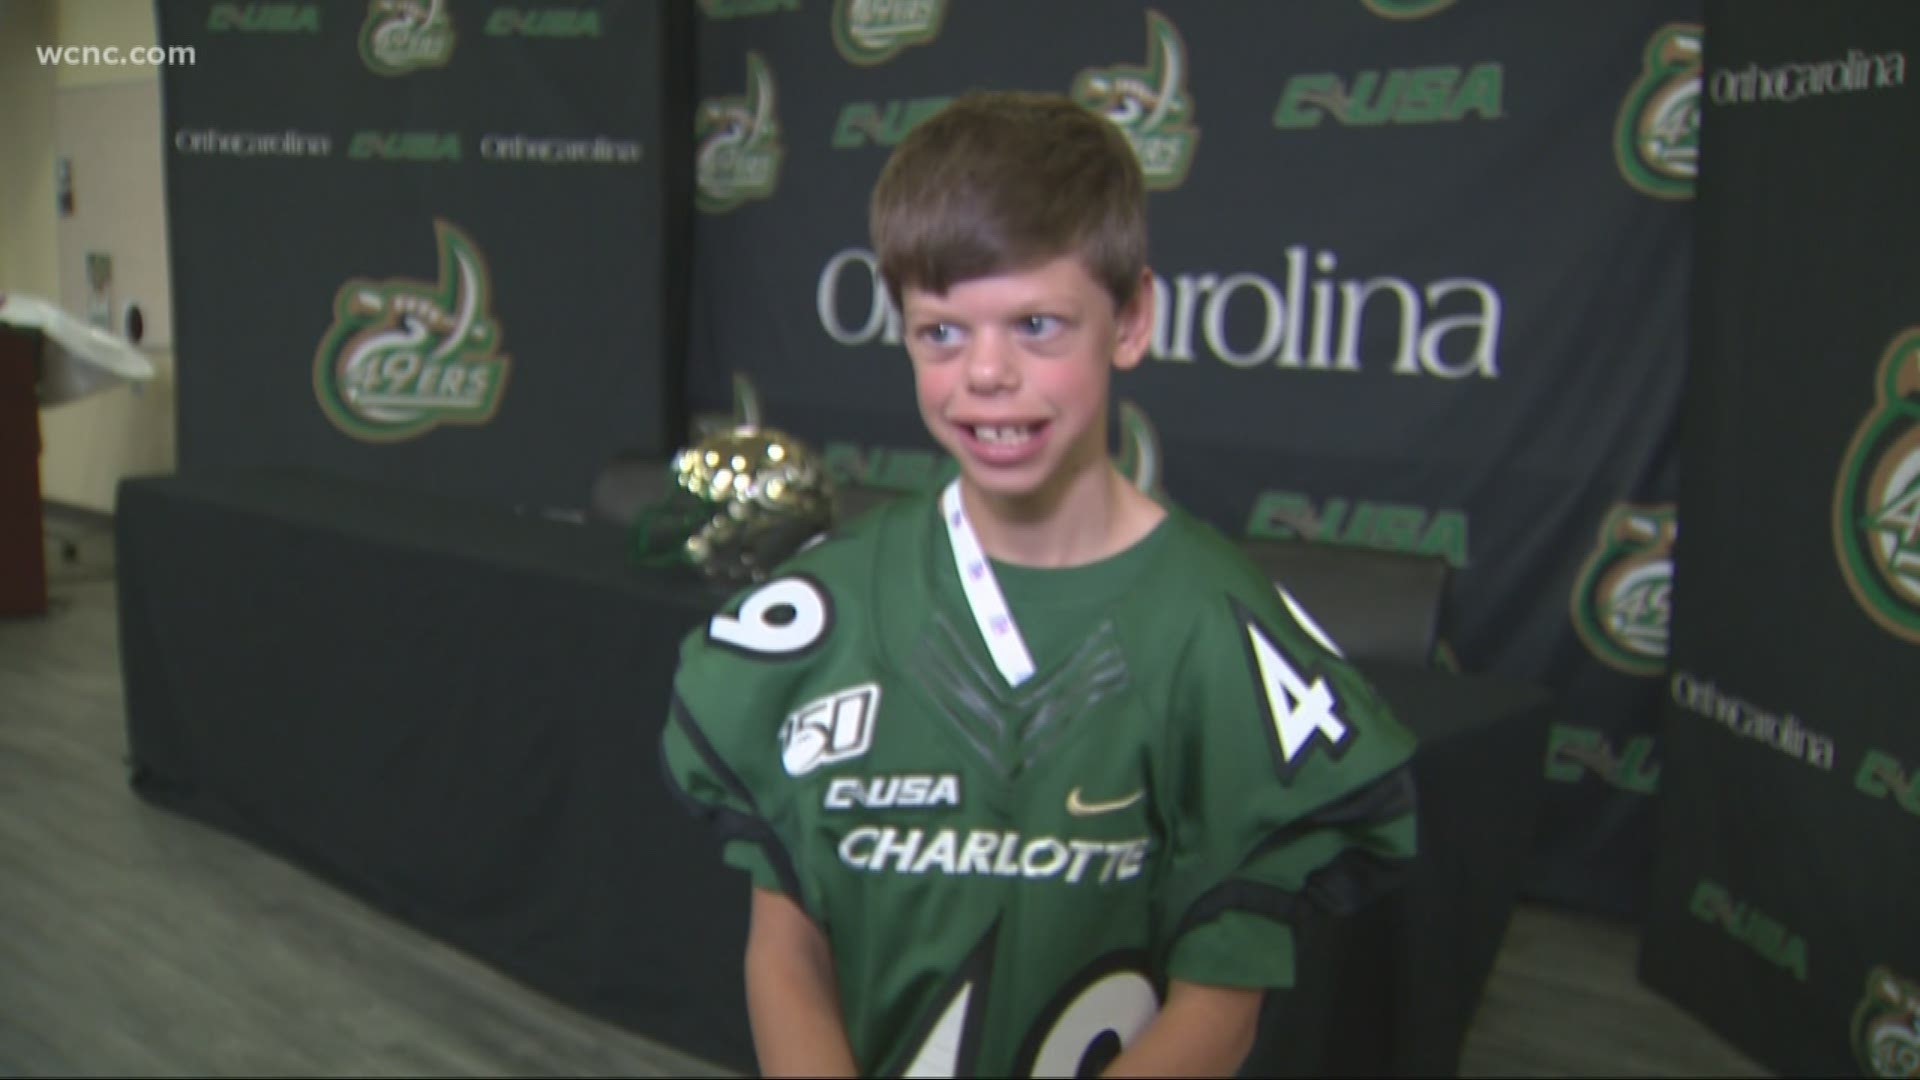 An 11-year-old with a genetic condition is the latest prospect for the Charlotte 49ers, and though he may not take the field, the 49ers are positive he'll make an impact.